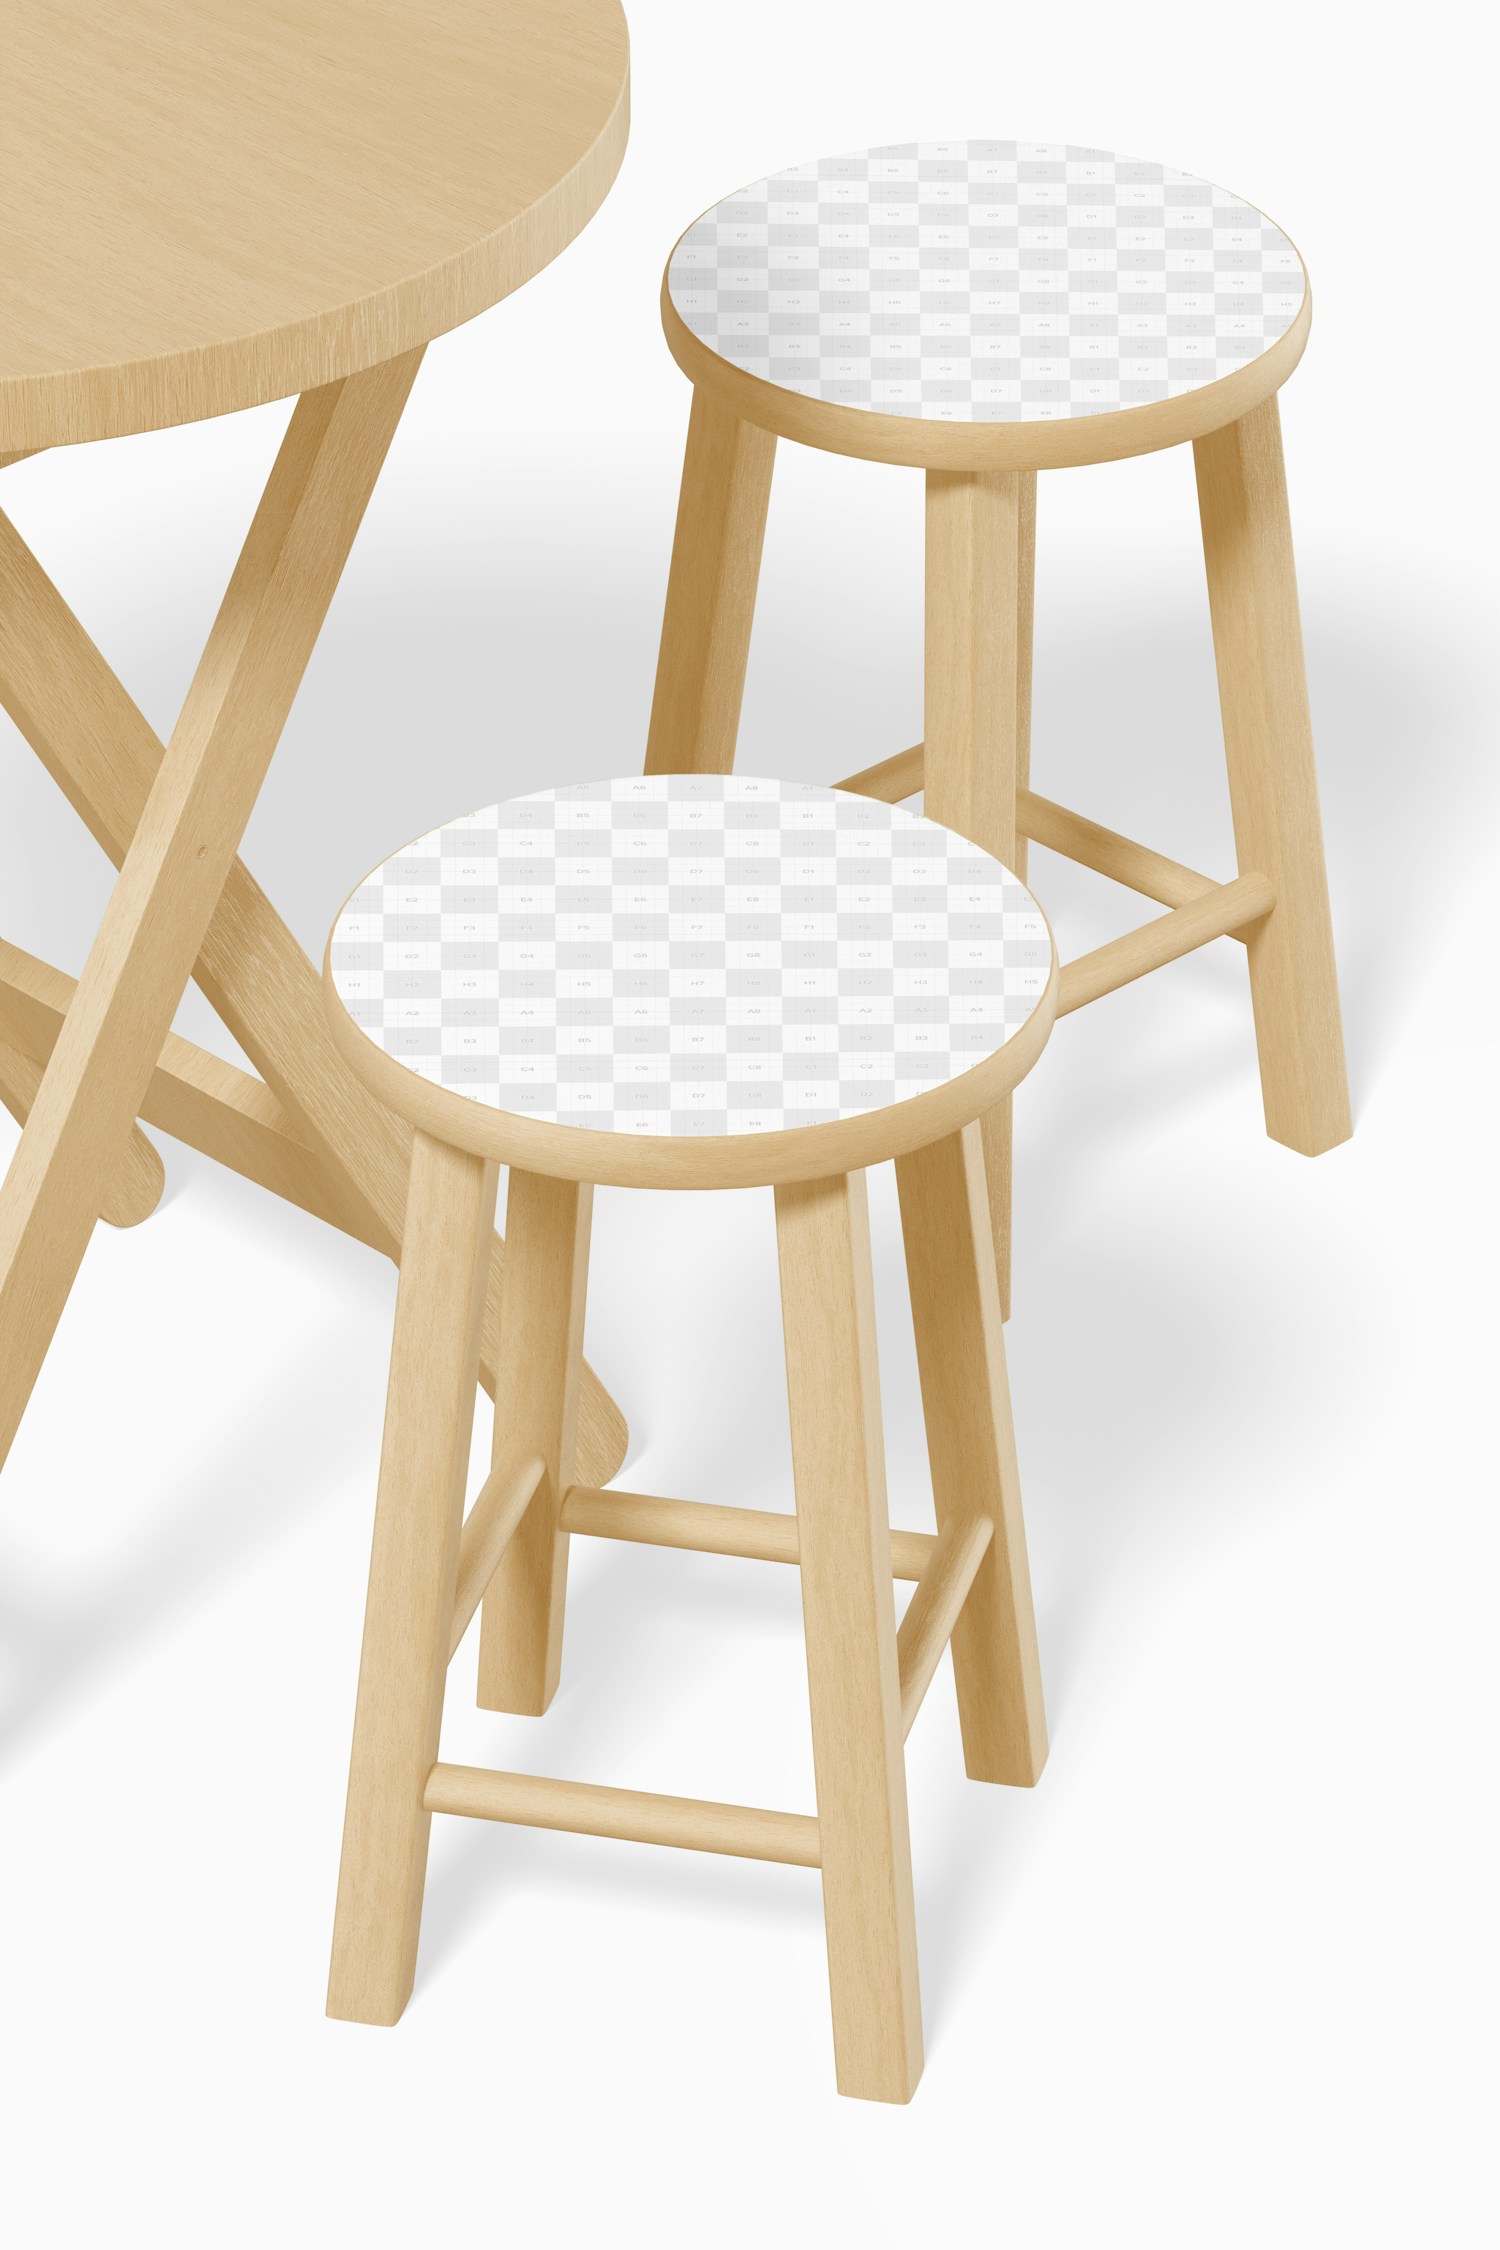 Round Wooden Stools with Table Mockup, Close Up